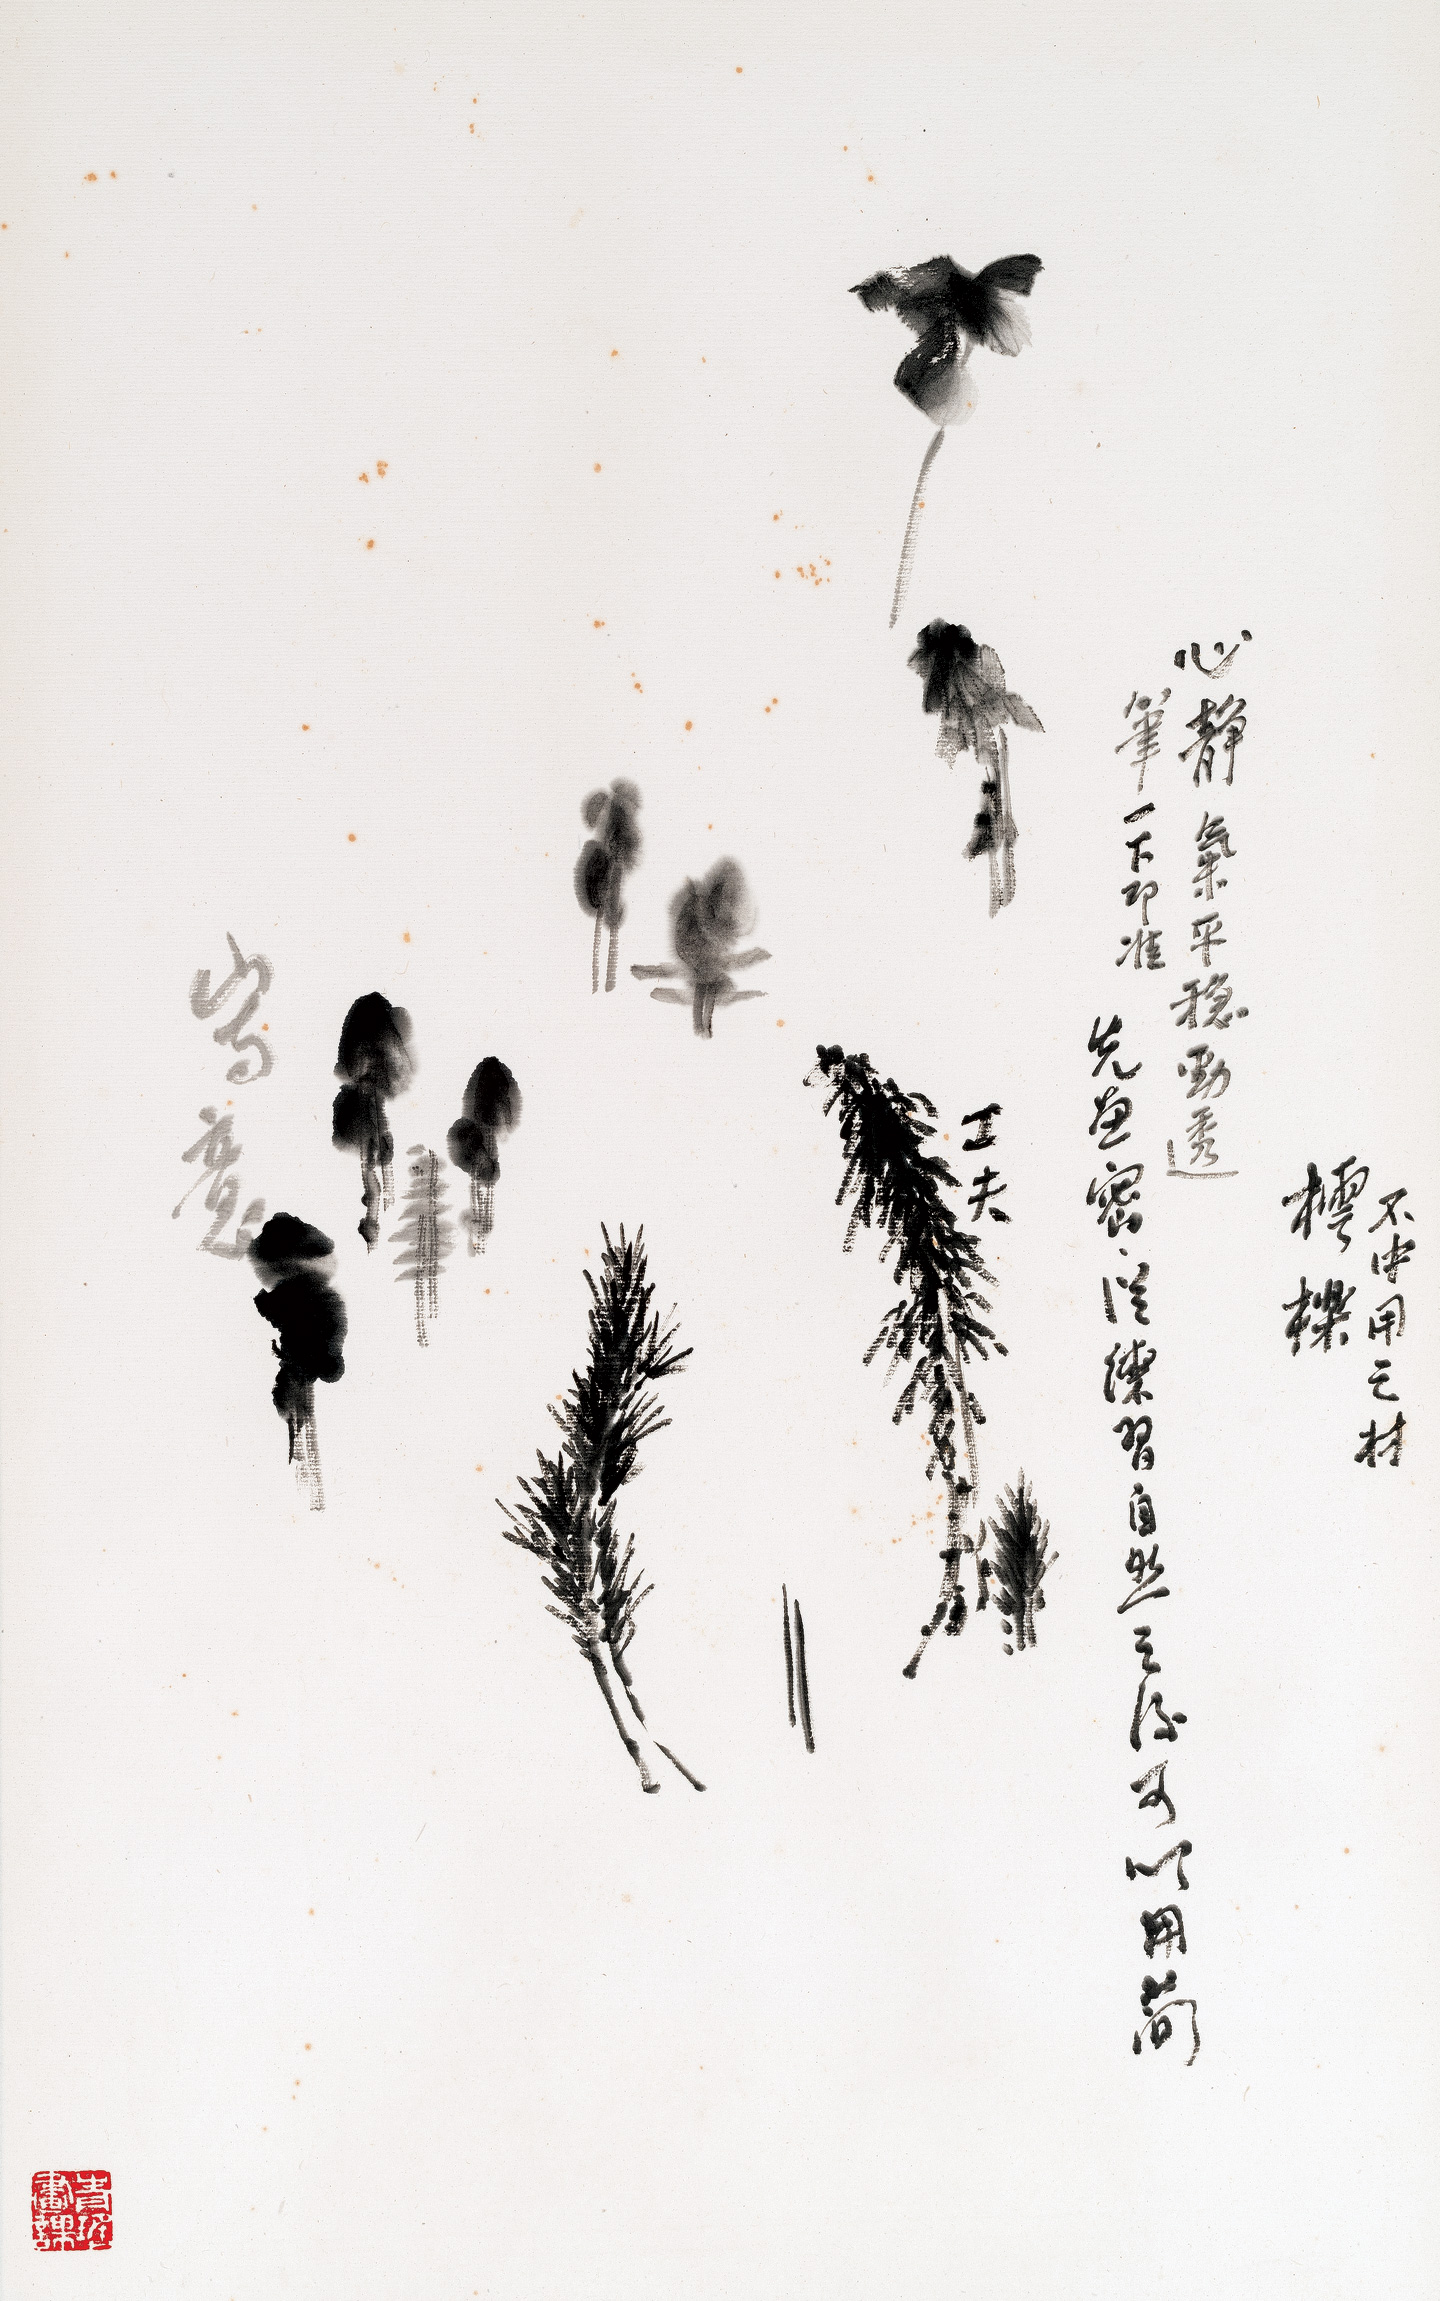 The Making of Chinese Painting and Calligraphy